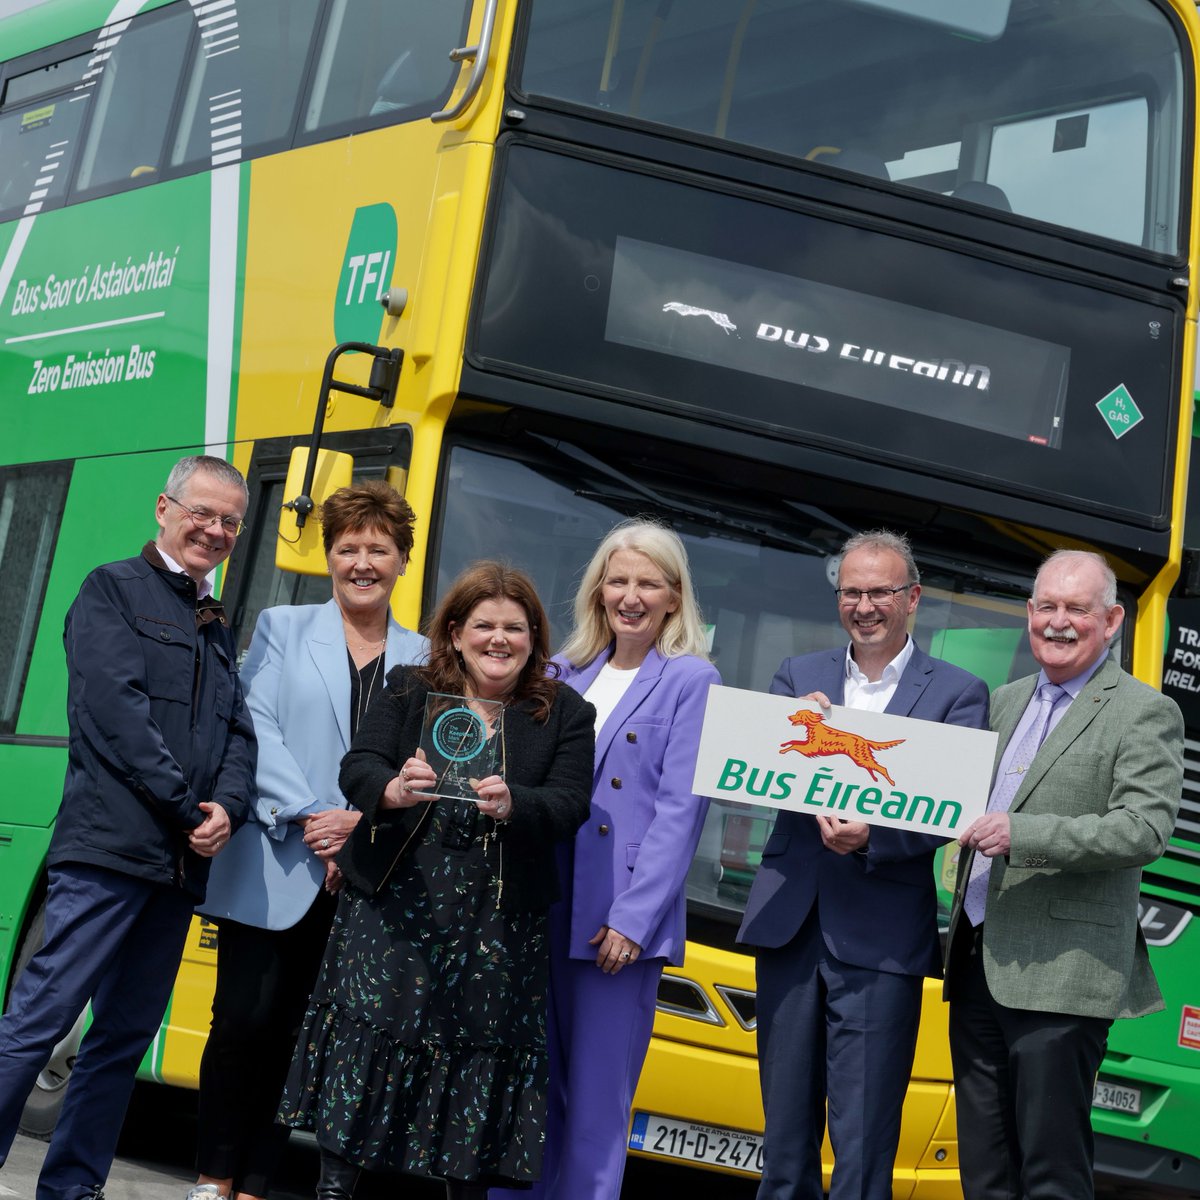 Bus Éireann is delighted to have signed up to TheKeepWellMark, a new #WorkplaceWellness accreditation from IBEC. Employee Wellness is a high priority for us & we are making a commitment to this by signing up to #TheKeepWellMark buseireann.ie/bus_eireann_ne… #IbecKeepWell @IbecKeepWell